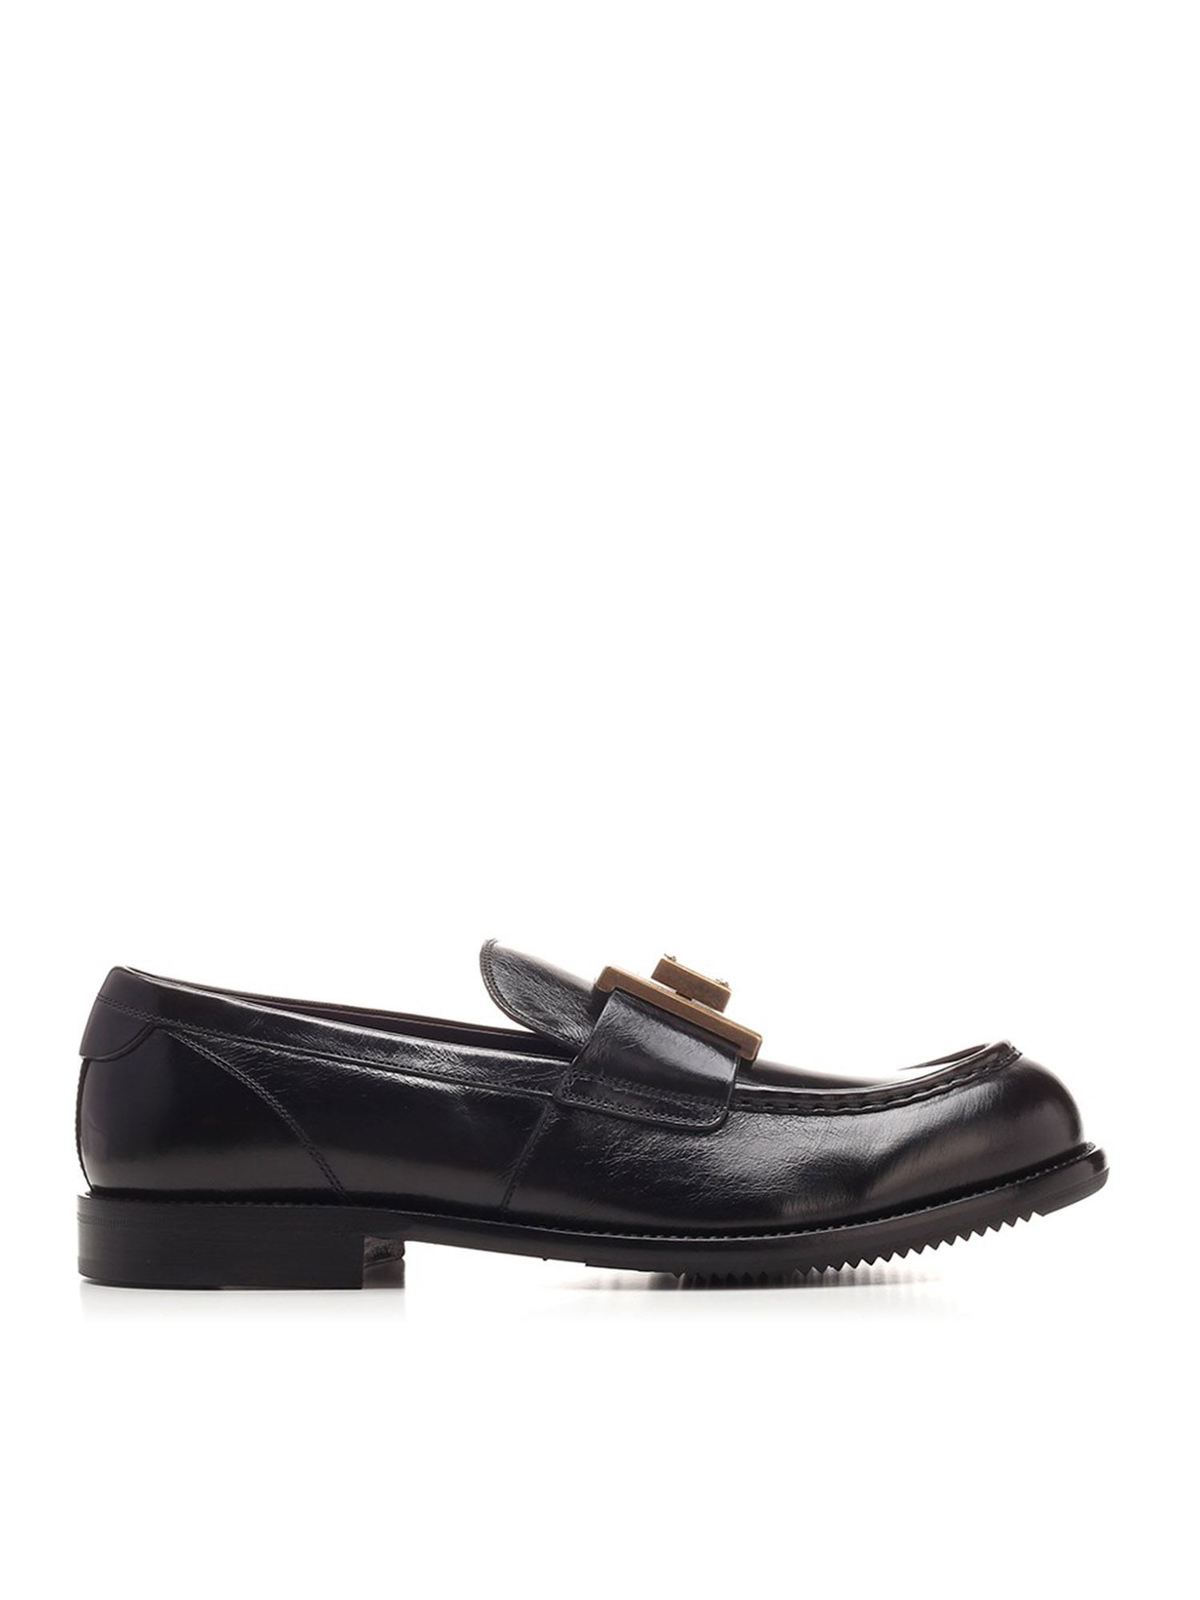 Loafers & Slippers Dolce & Gabbana - Bernini loafers in black ...